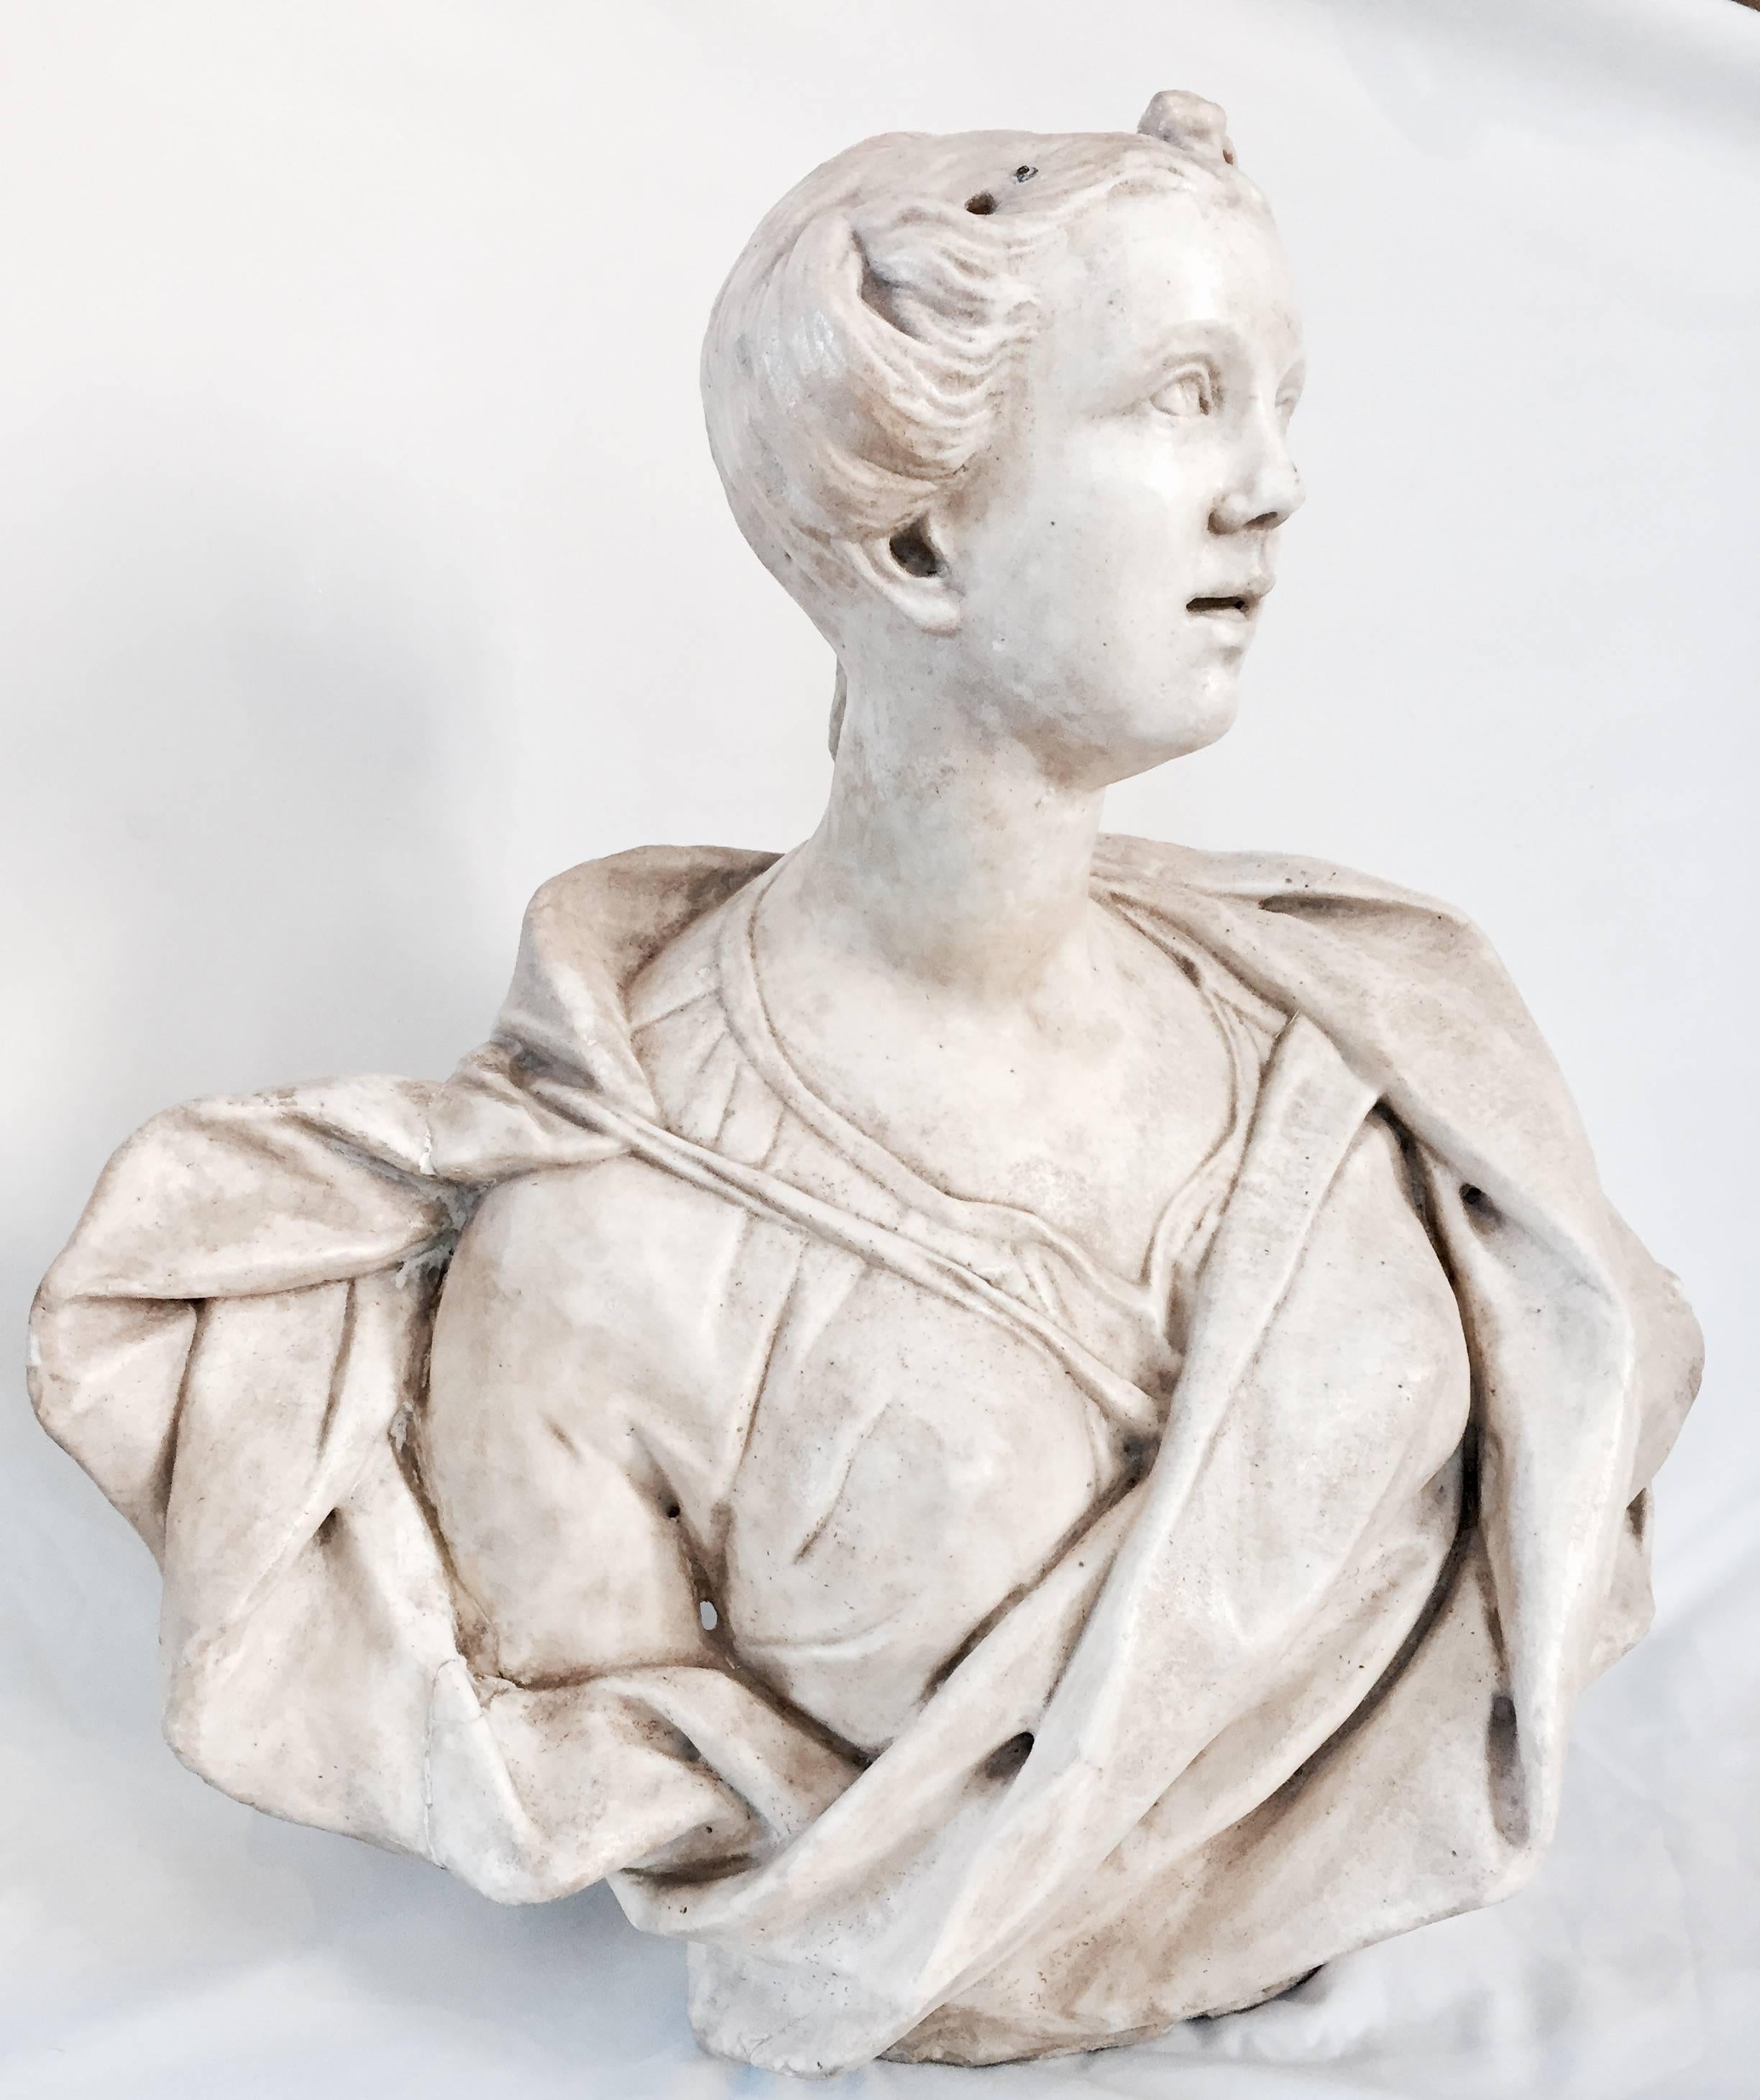 This lifesize bust of a European lady was exquisitely carved out of Statuario marble in the late 1600s. The creases in the silk dress have debth and are an indication that the sitter was aristocratic. A flower adorns her hair due.